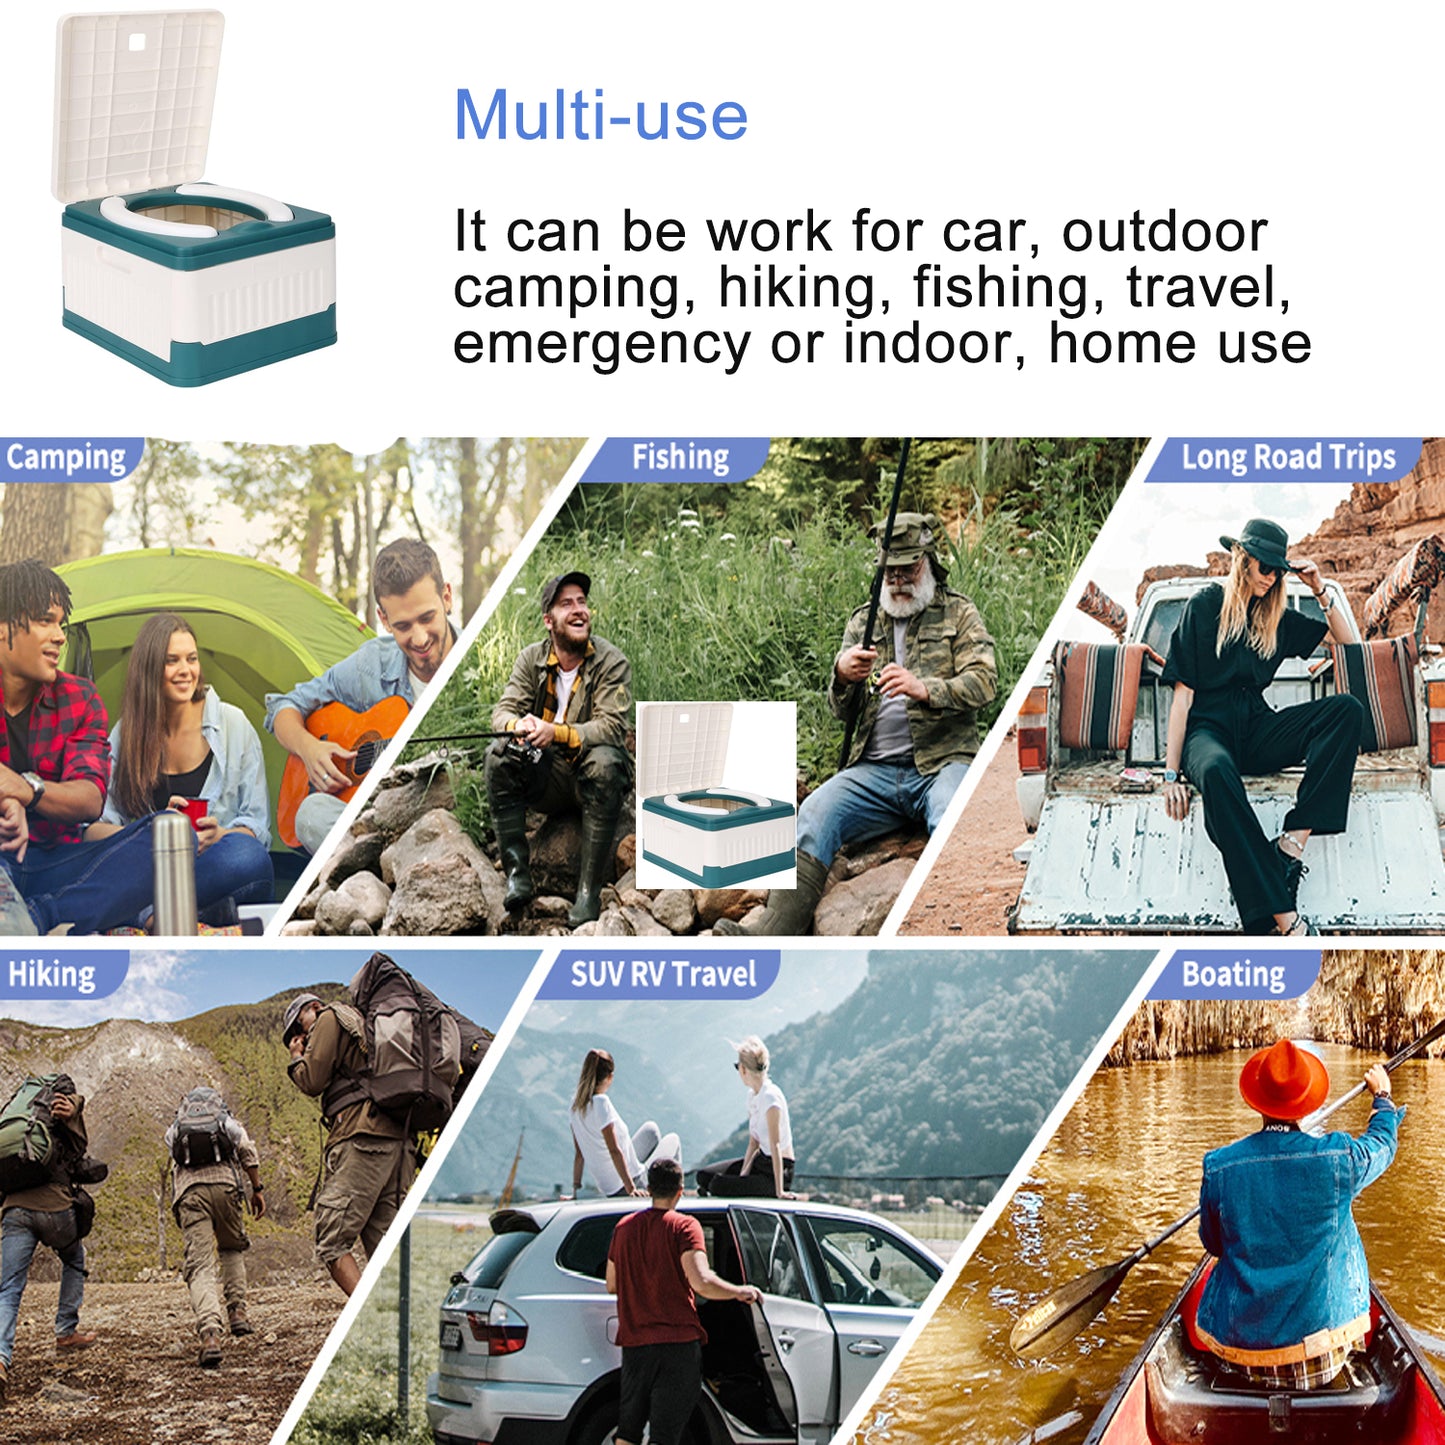 Travel Portable Toilet for Camping Car Outdoor Indoor Hiking Emergency